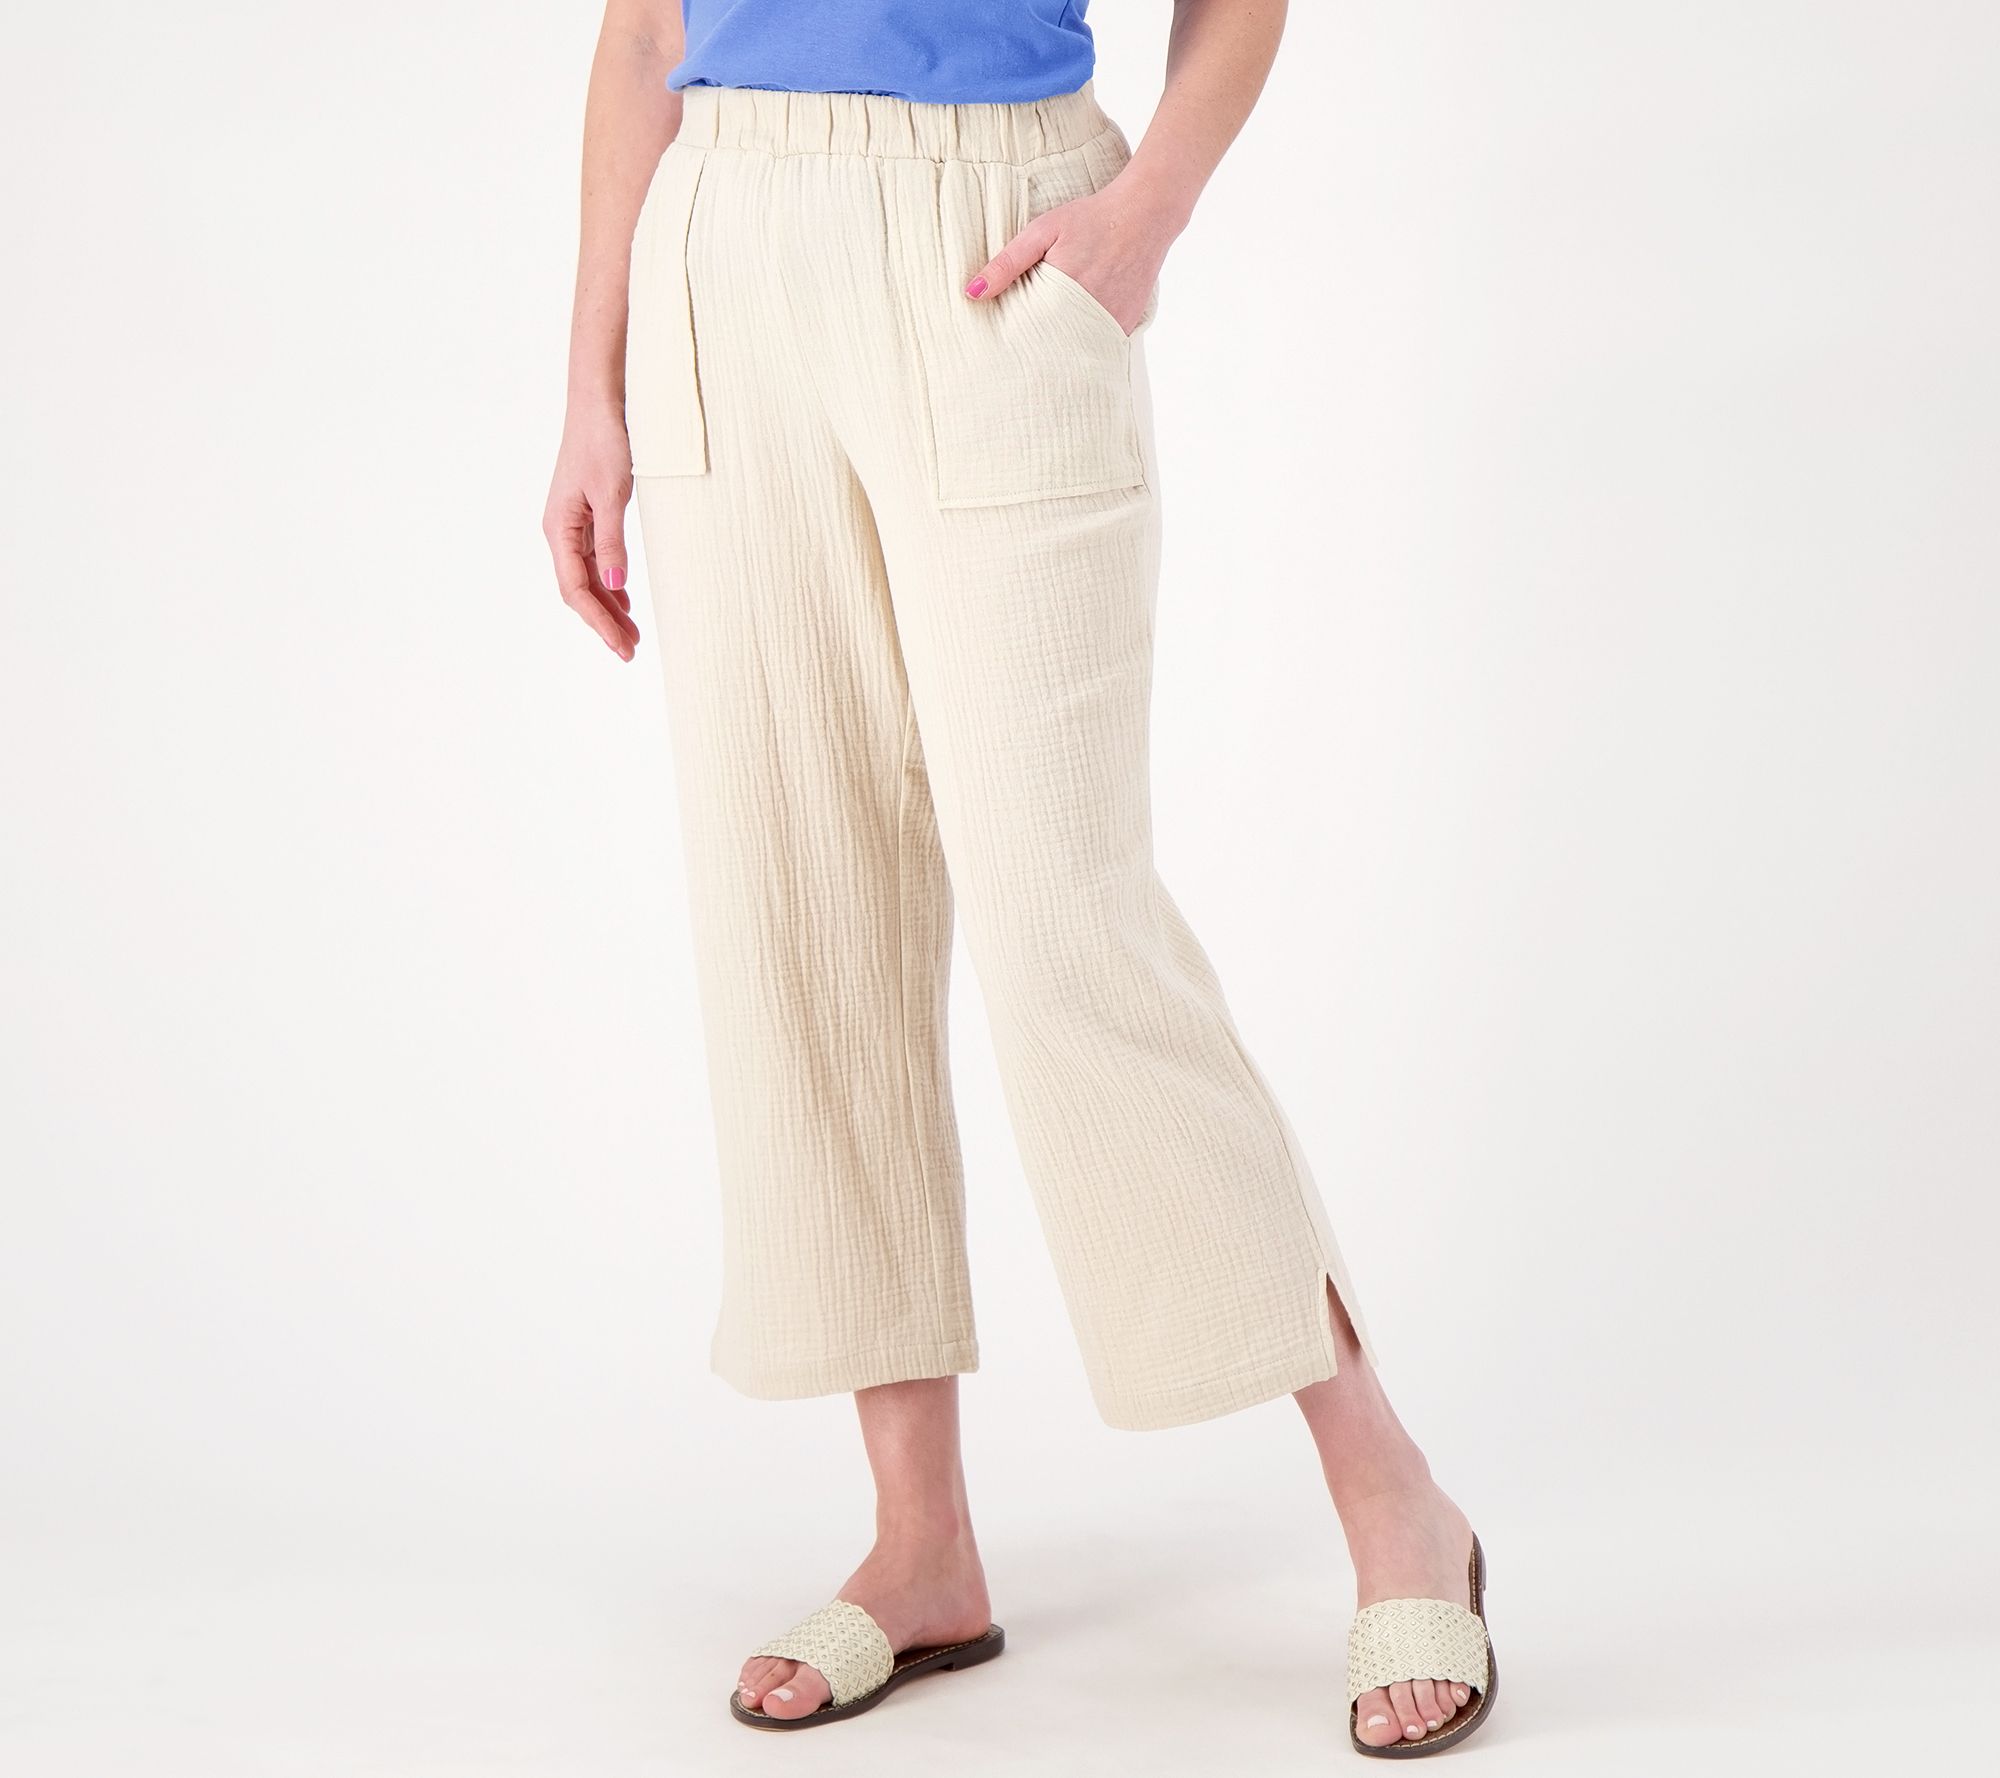 Denim & Co. By the Beach Knit Gauze Cropped Cinch Pant 